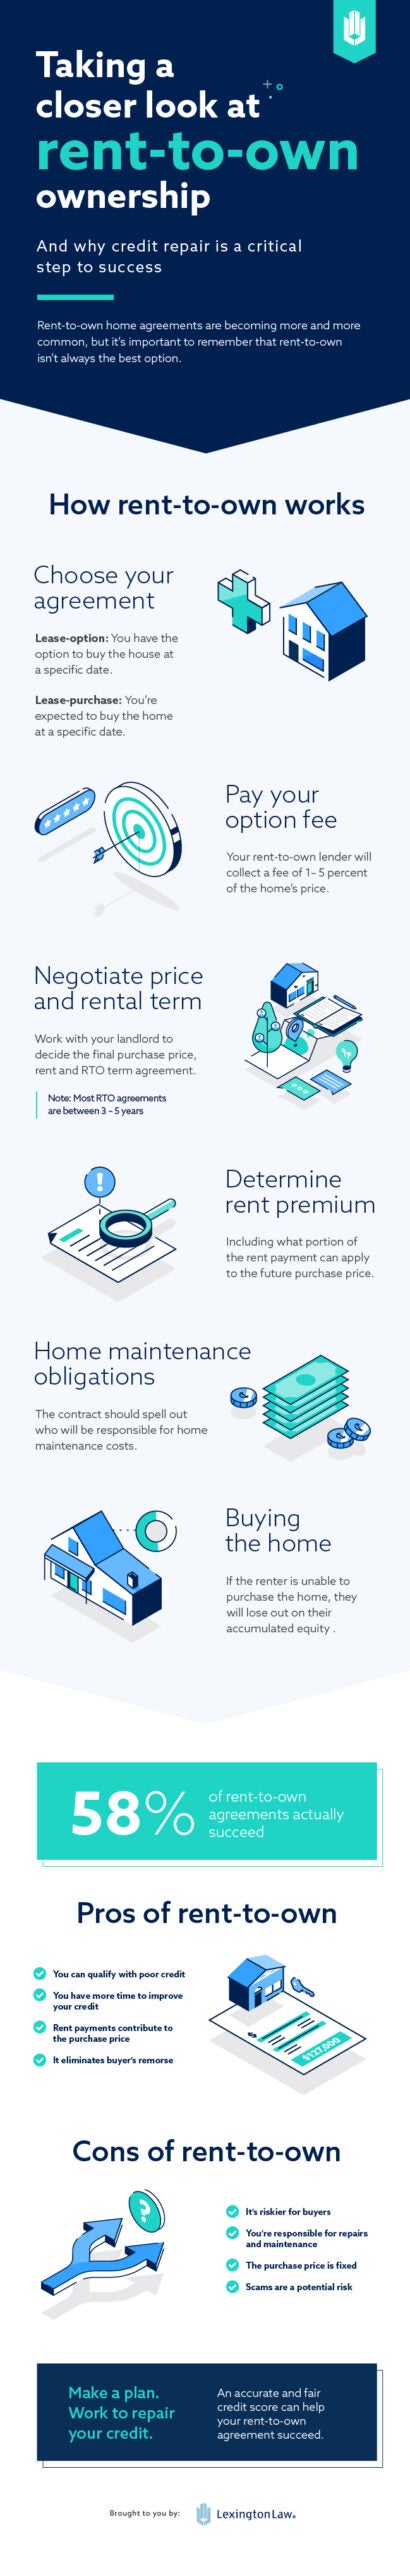 Infographic that illustrates rent-to-own ownership